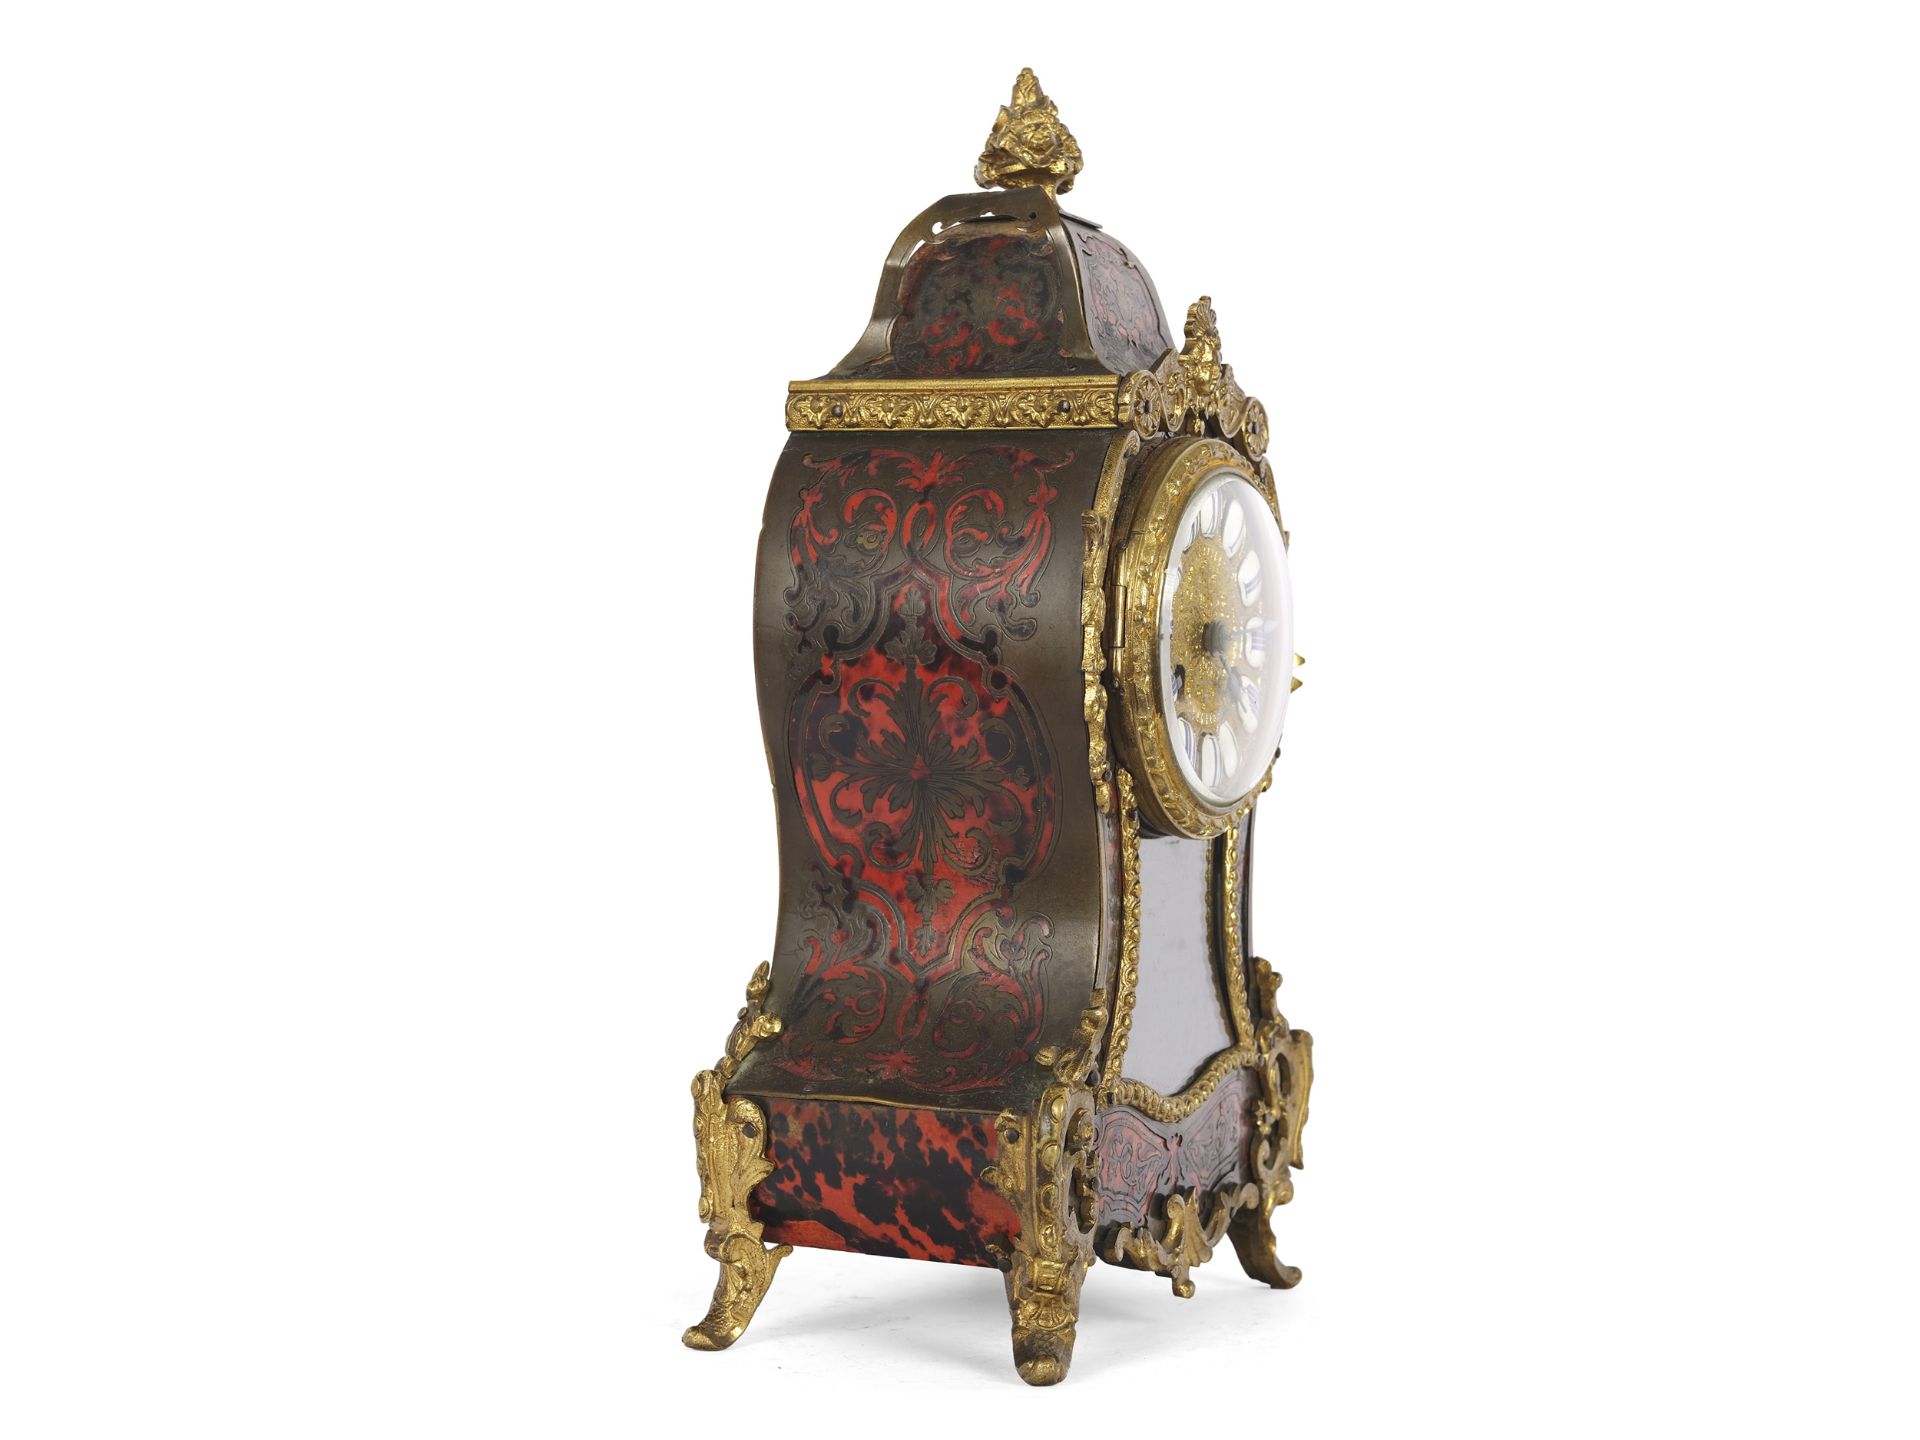 Commode clock, in the style of André-Charles Boulle - Image 3 of 5